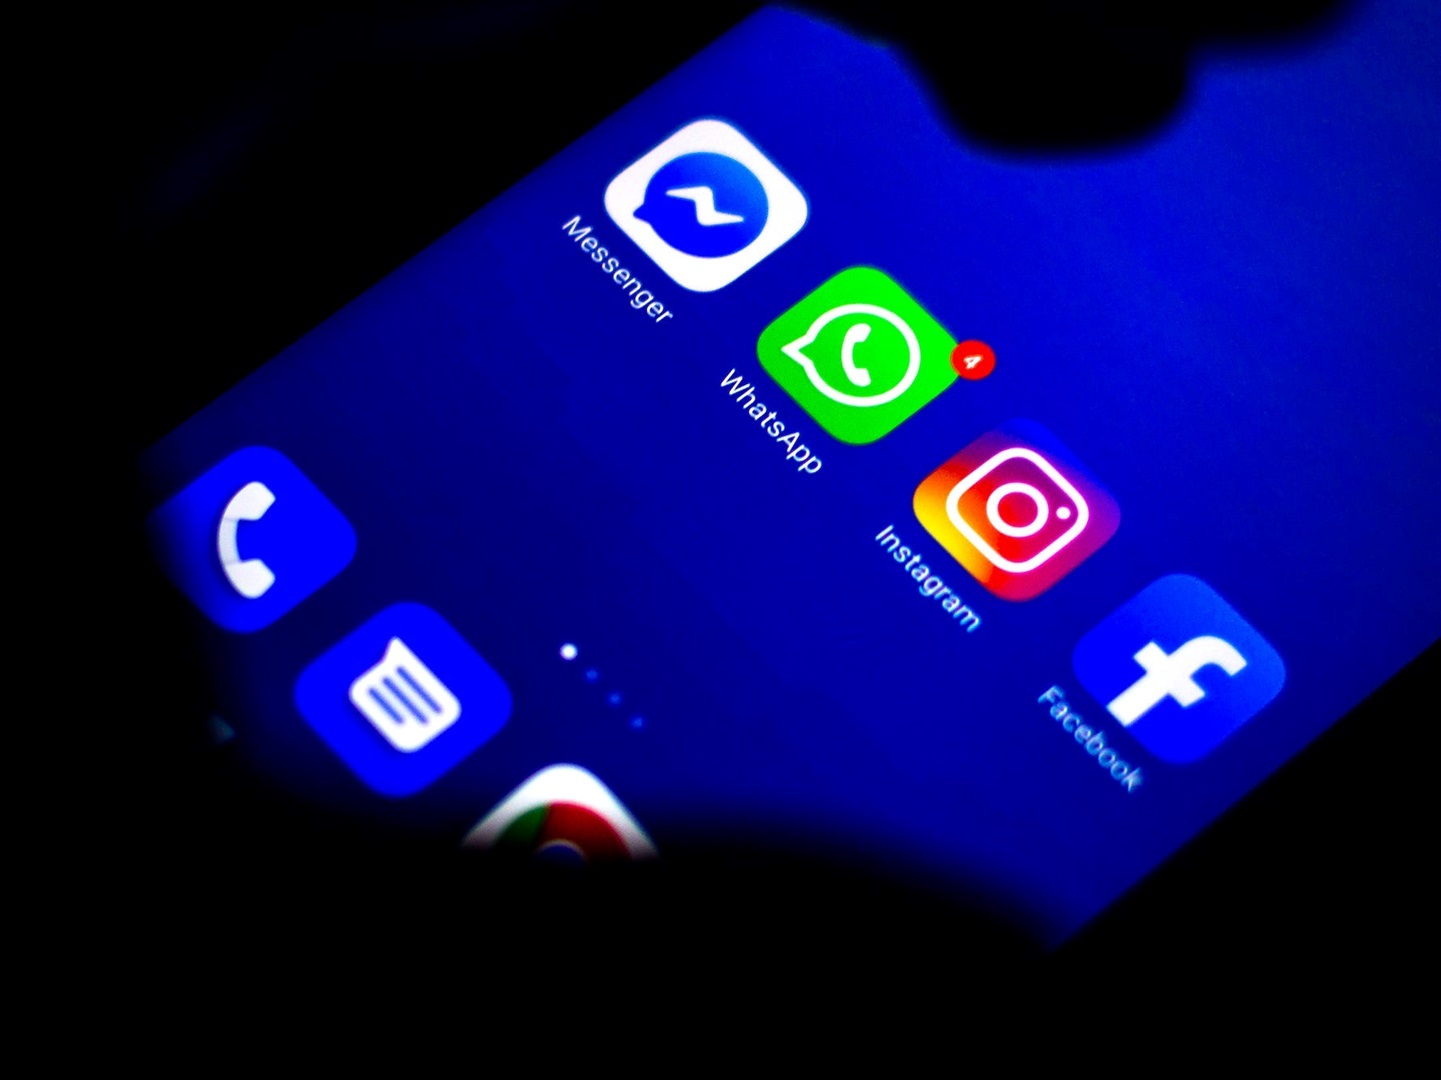 Several Facebook apps appeared to suffer an outage on Monday.
